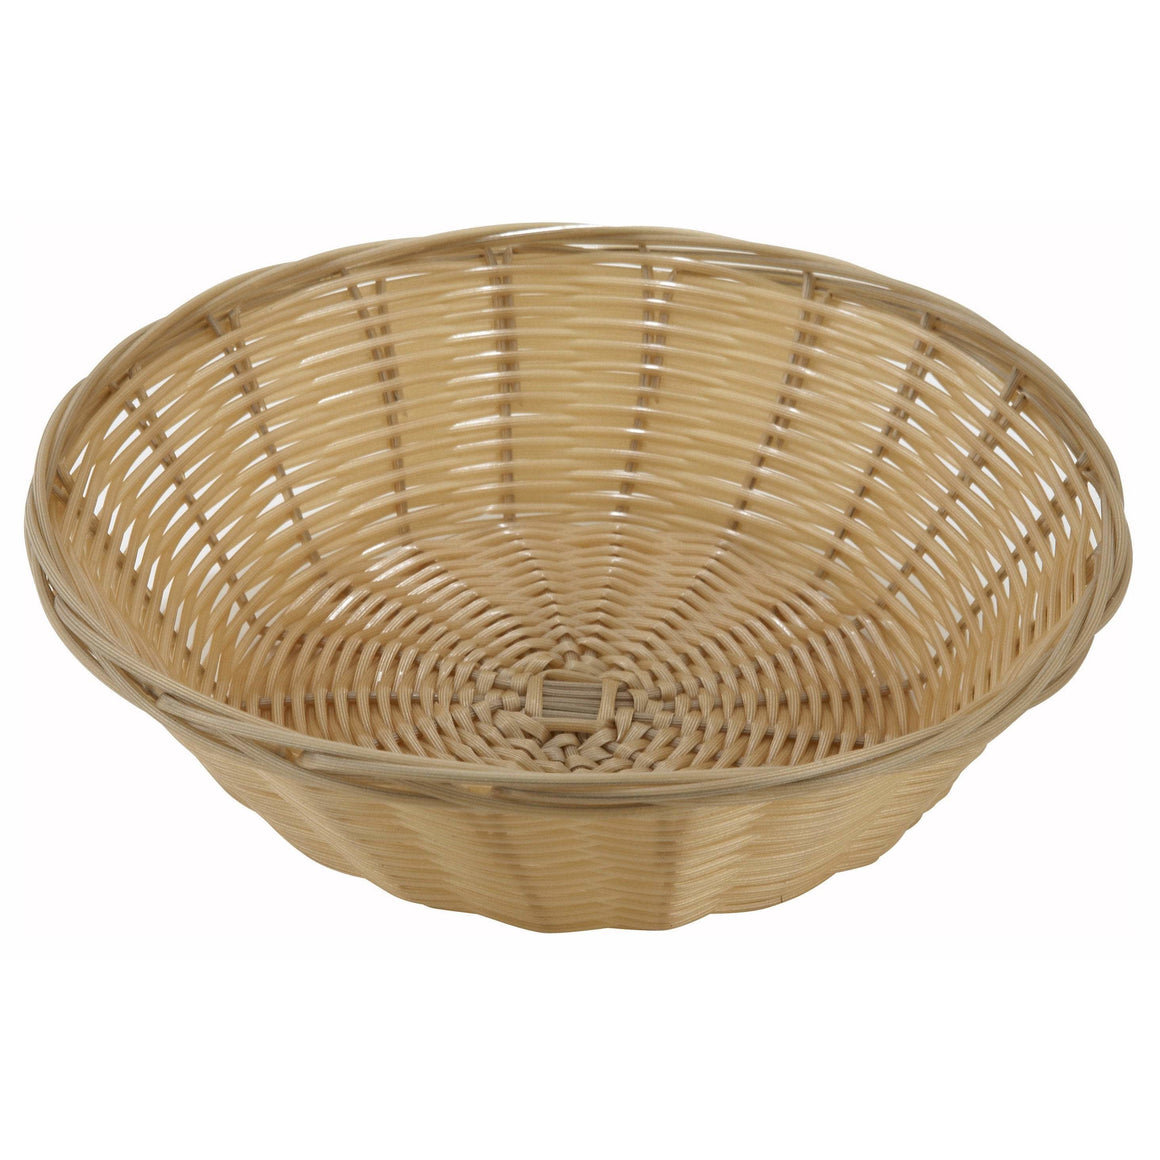 Winco - PWBN-9R - Poly Woven Baskets, Round, 9" x 2-3/4", Natural - Tabletop - Maltese & Co New and Used  restaurant Equipment 